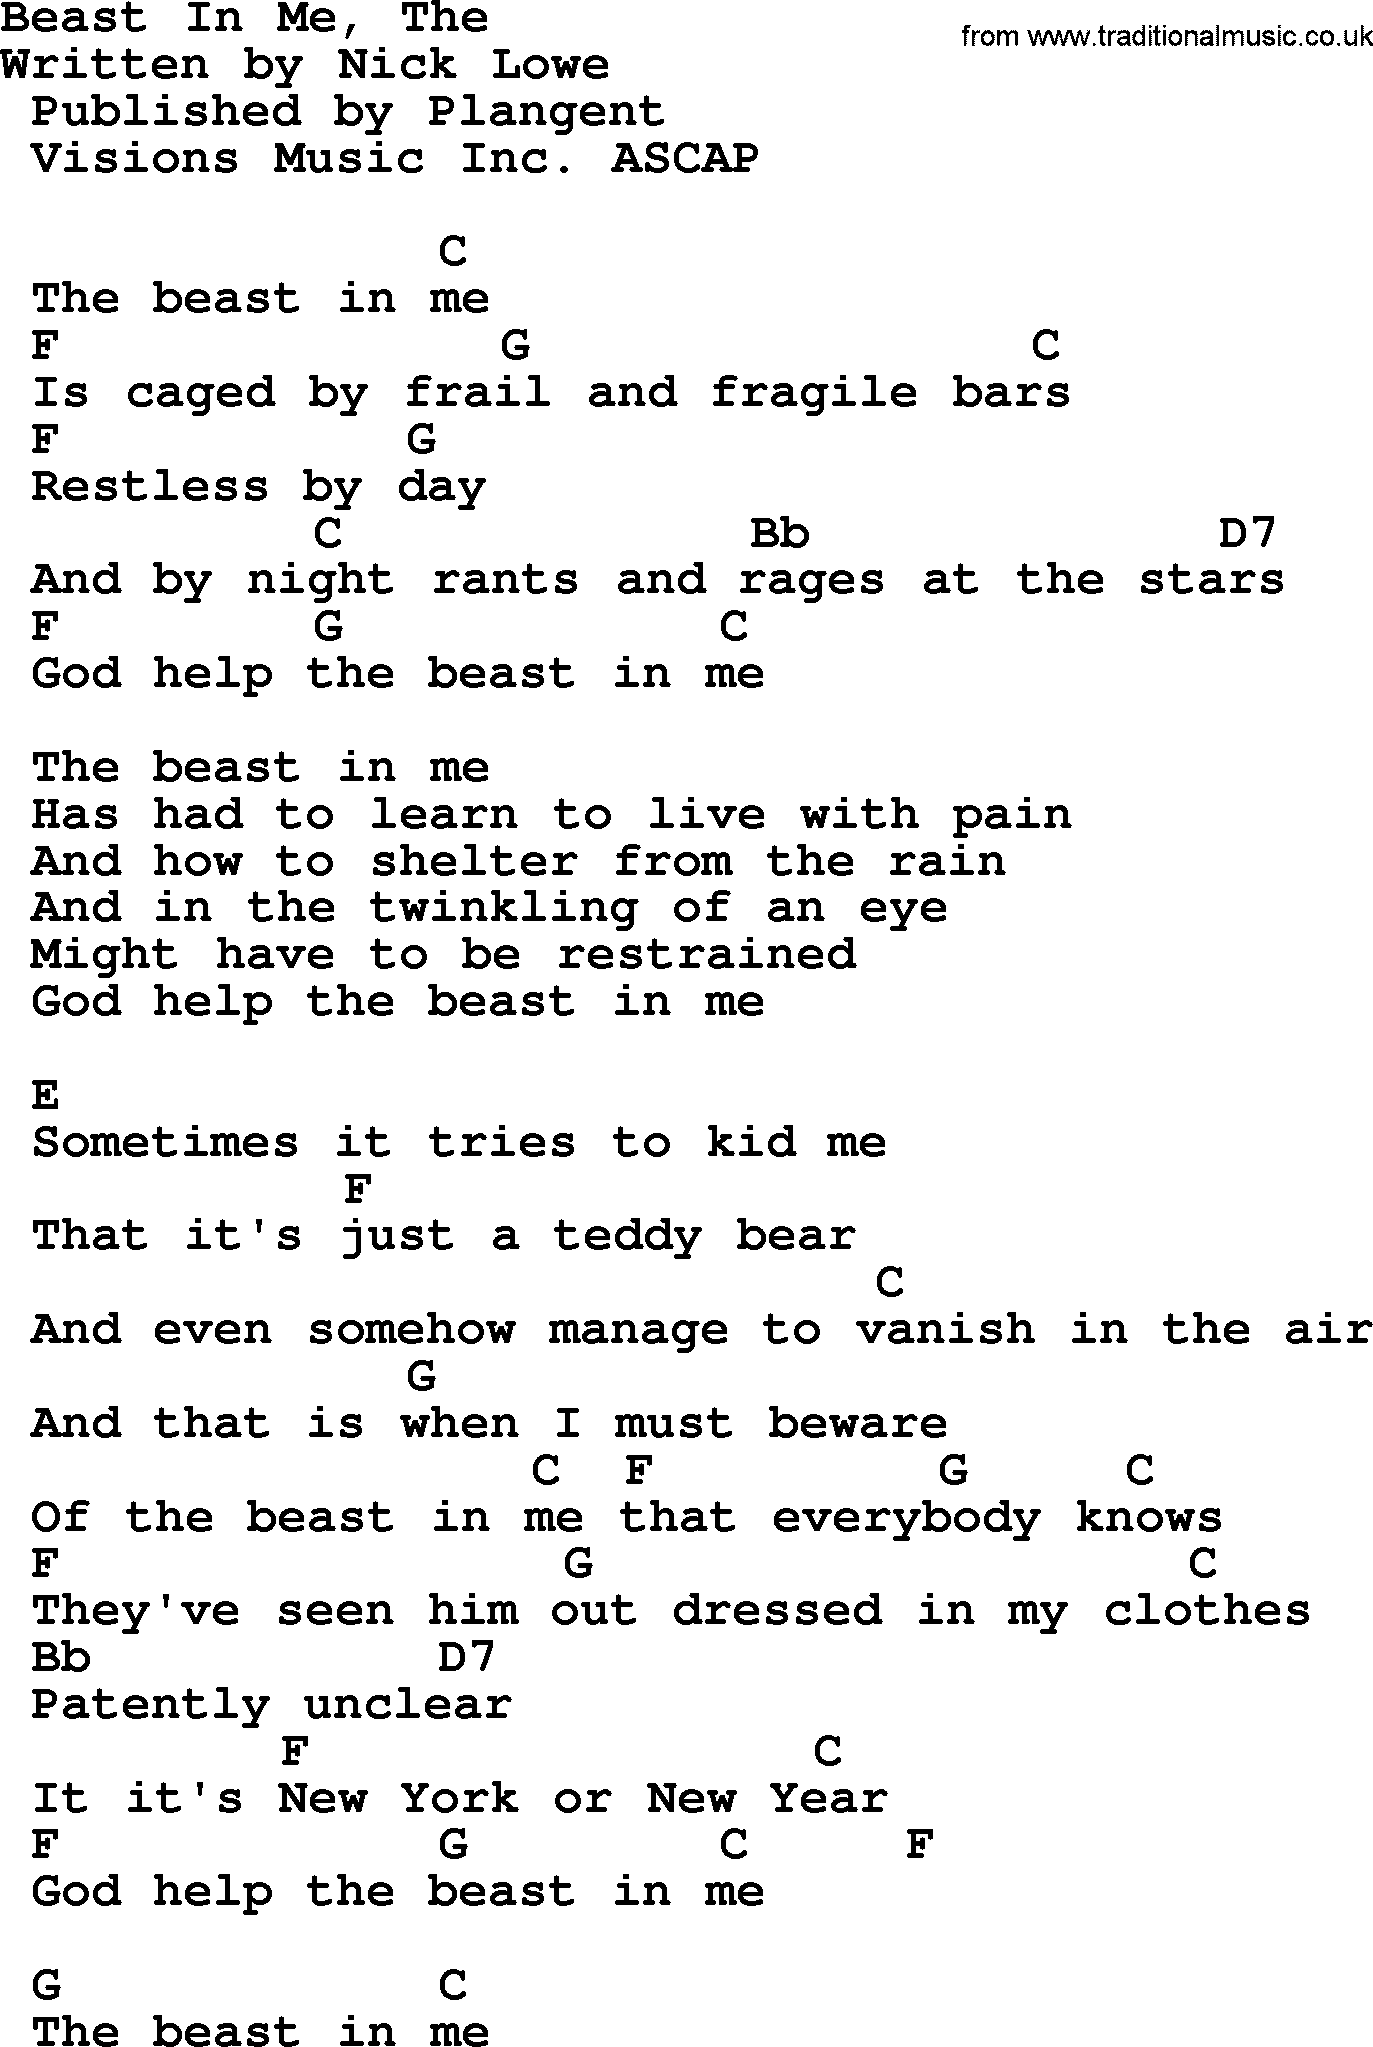 Johnny Cash song Beast In Me, The, lyrics and chords